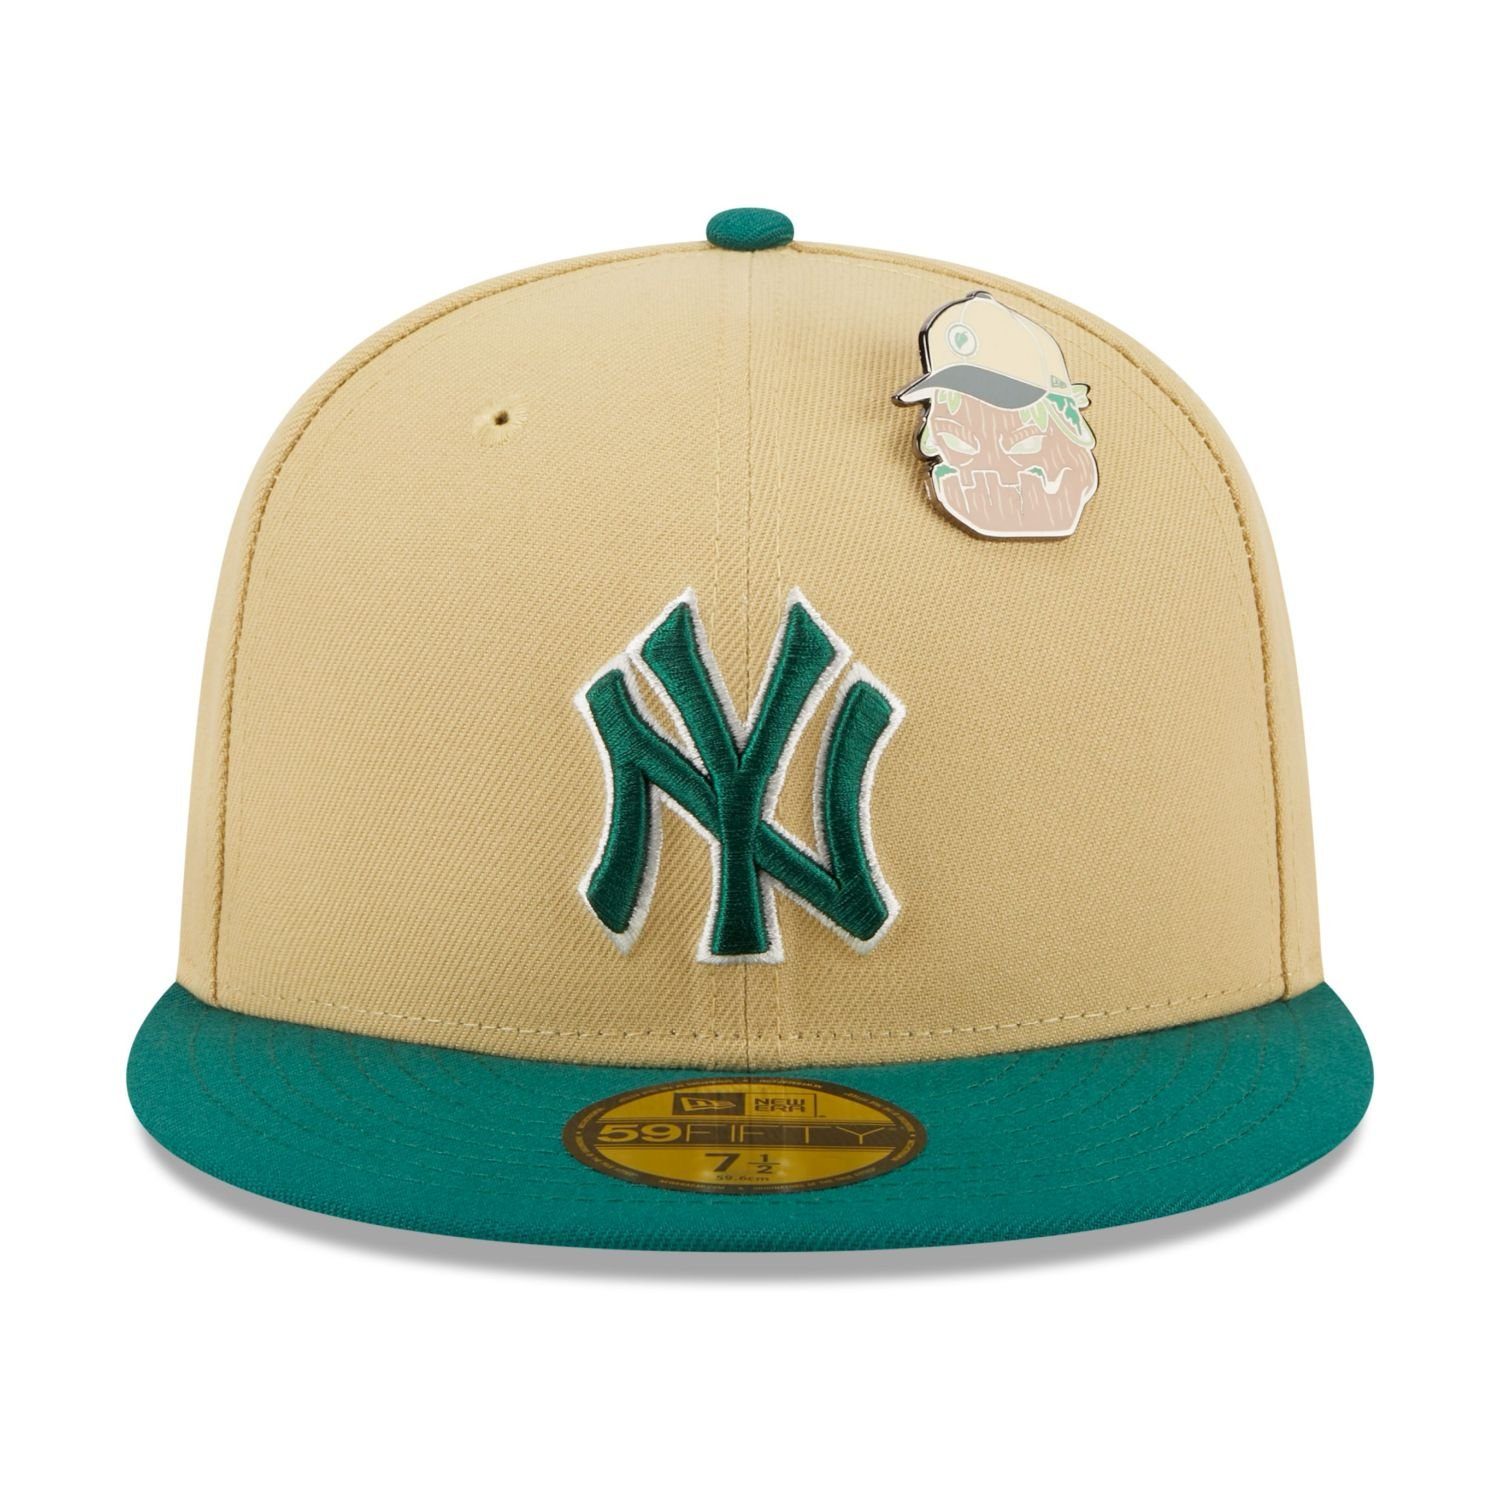 New PIN York Era Cap Fitted ELEMENTS 59Fifty New Yankees